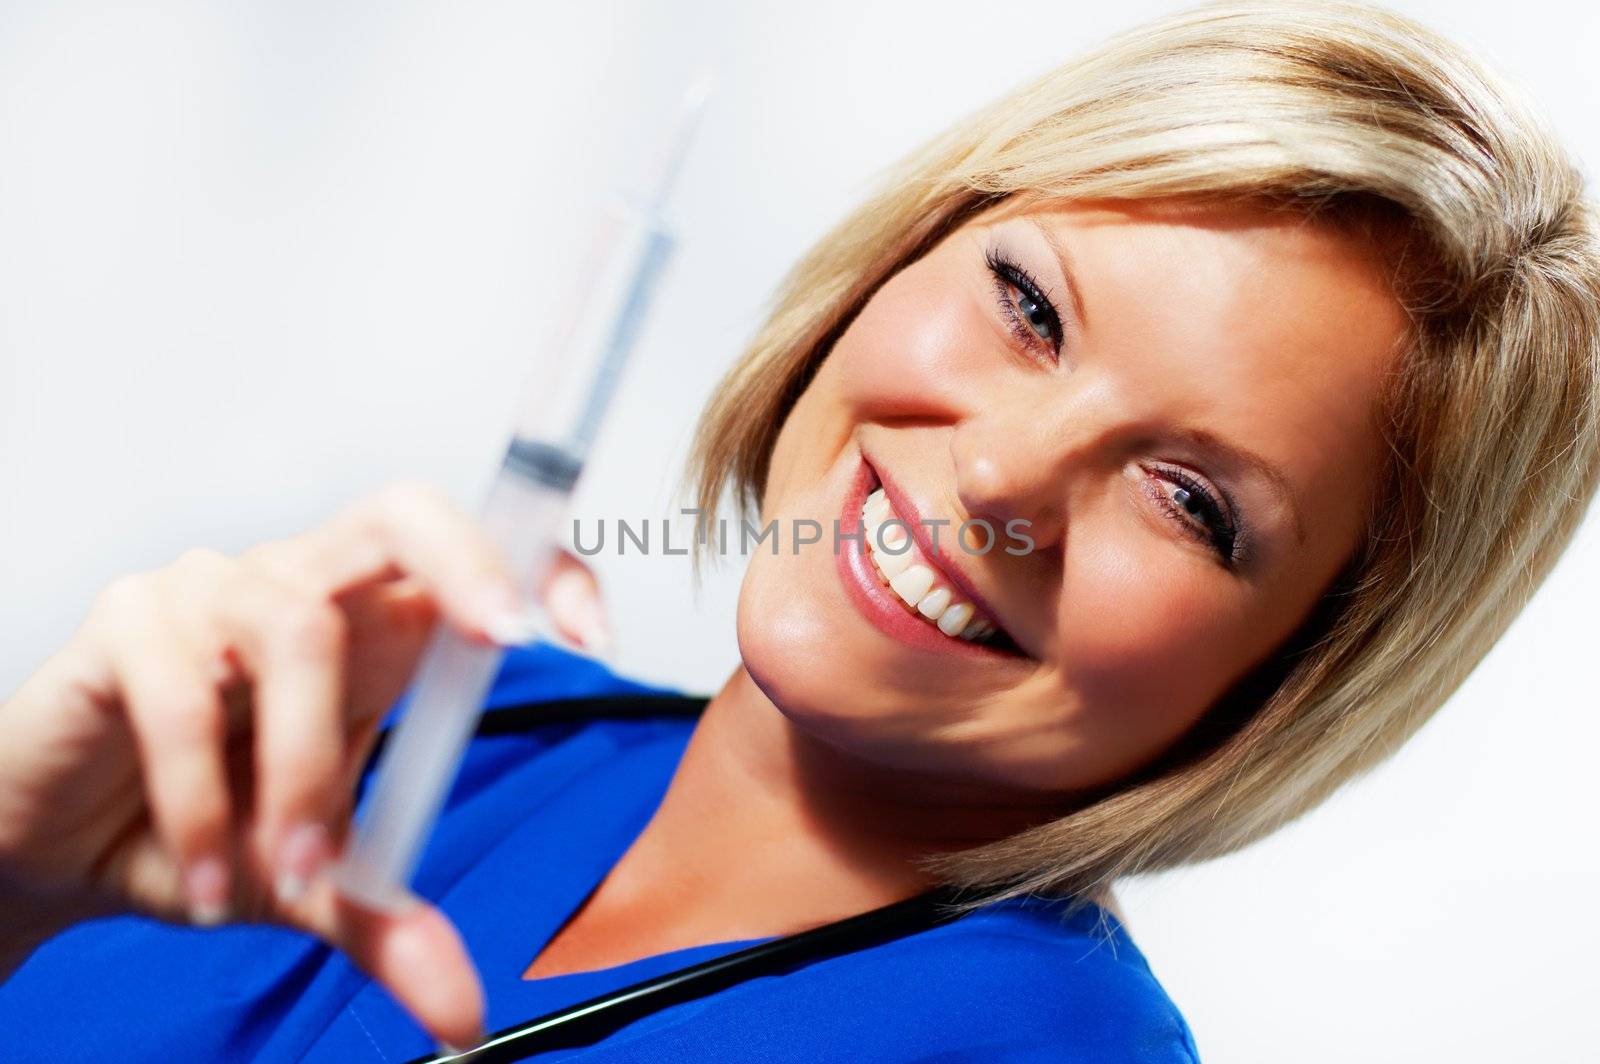 Mature woman nurse holding up a syringe and smiling.